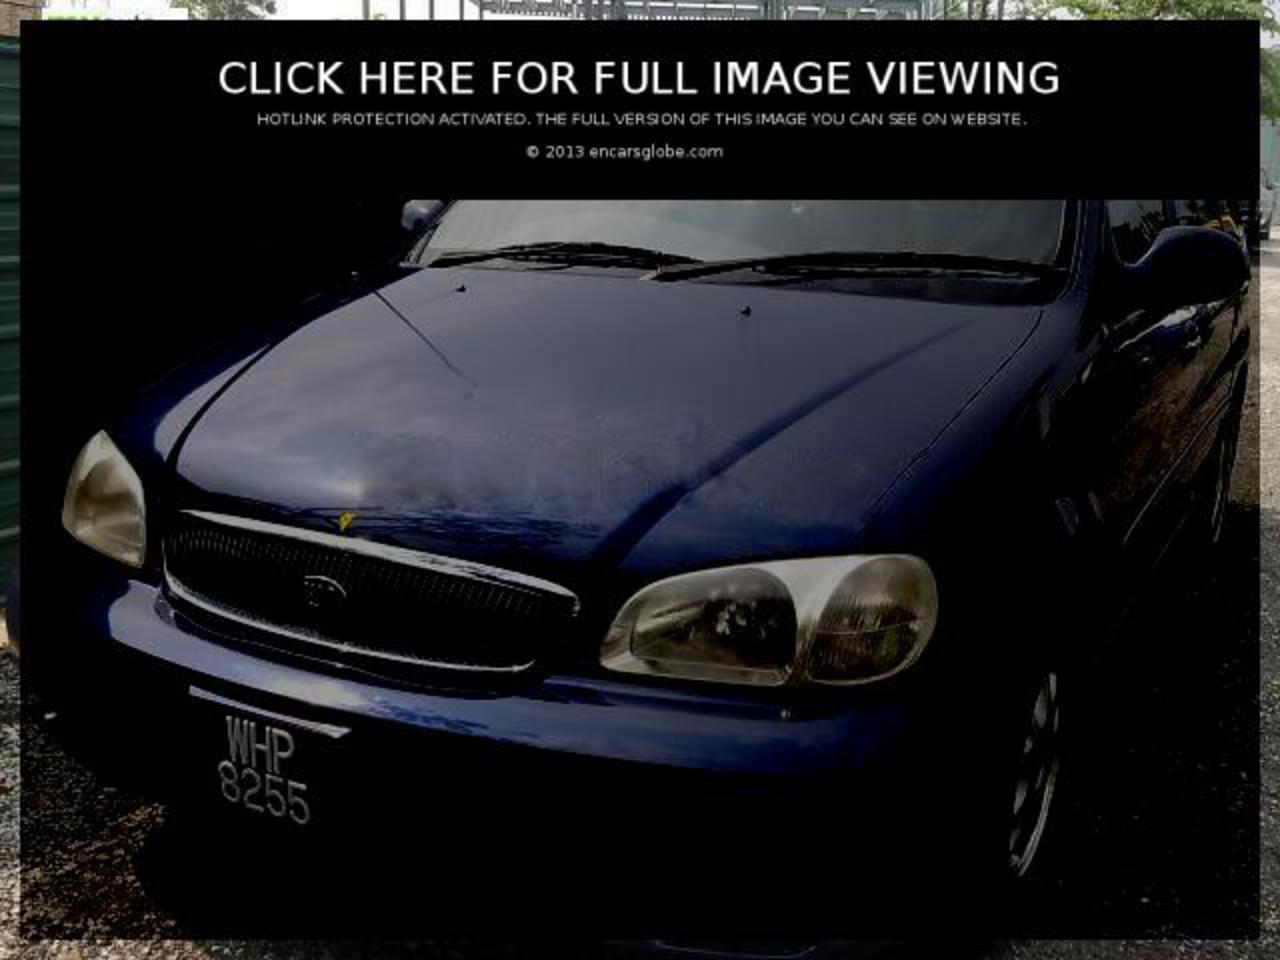 Kia Carnival 38 V6 : Photo gallery, complete information about ...